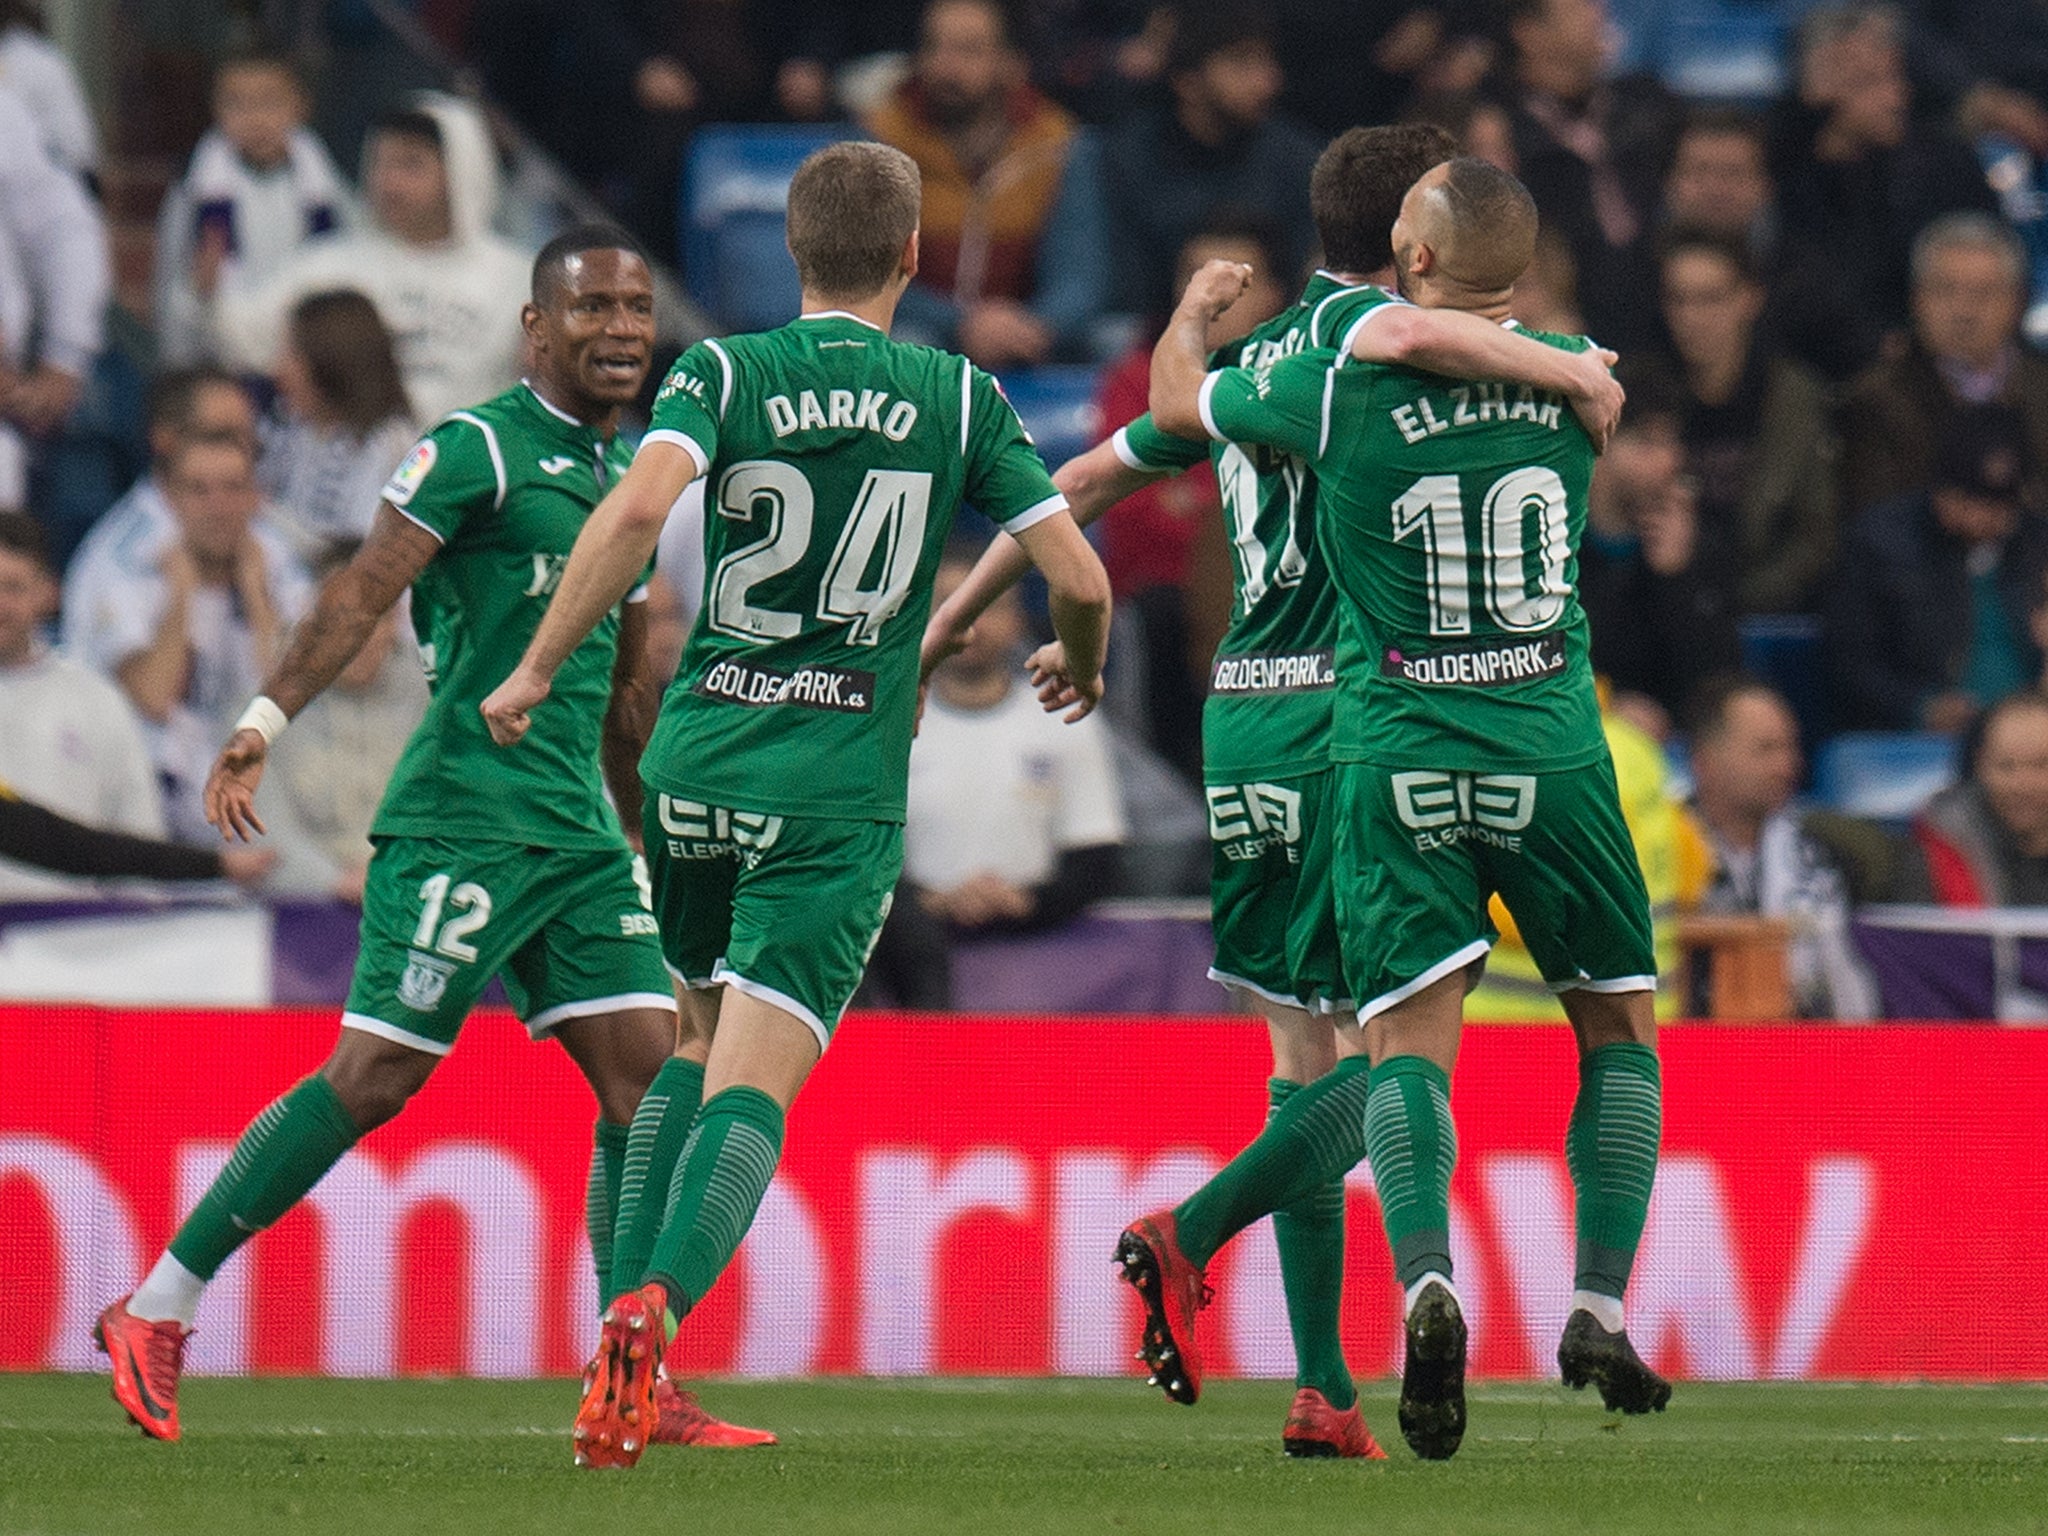 Leganes celebrated a surprise 2-2 aggregate victory over Real Madrid on away goals